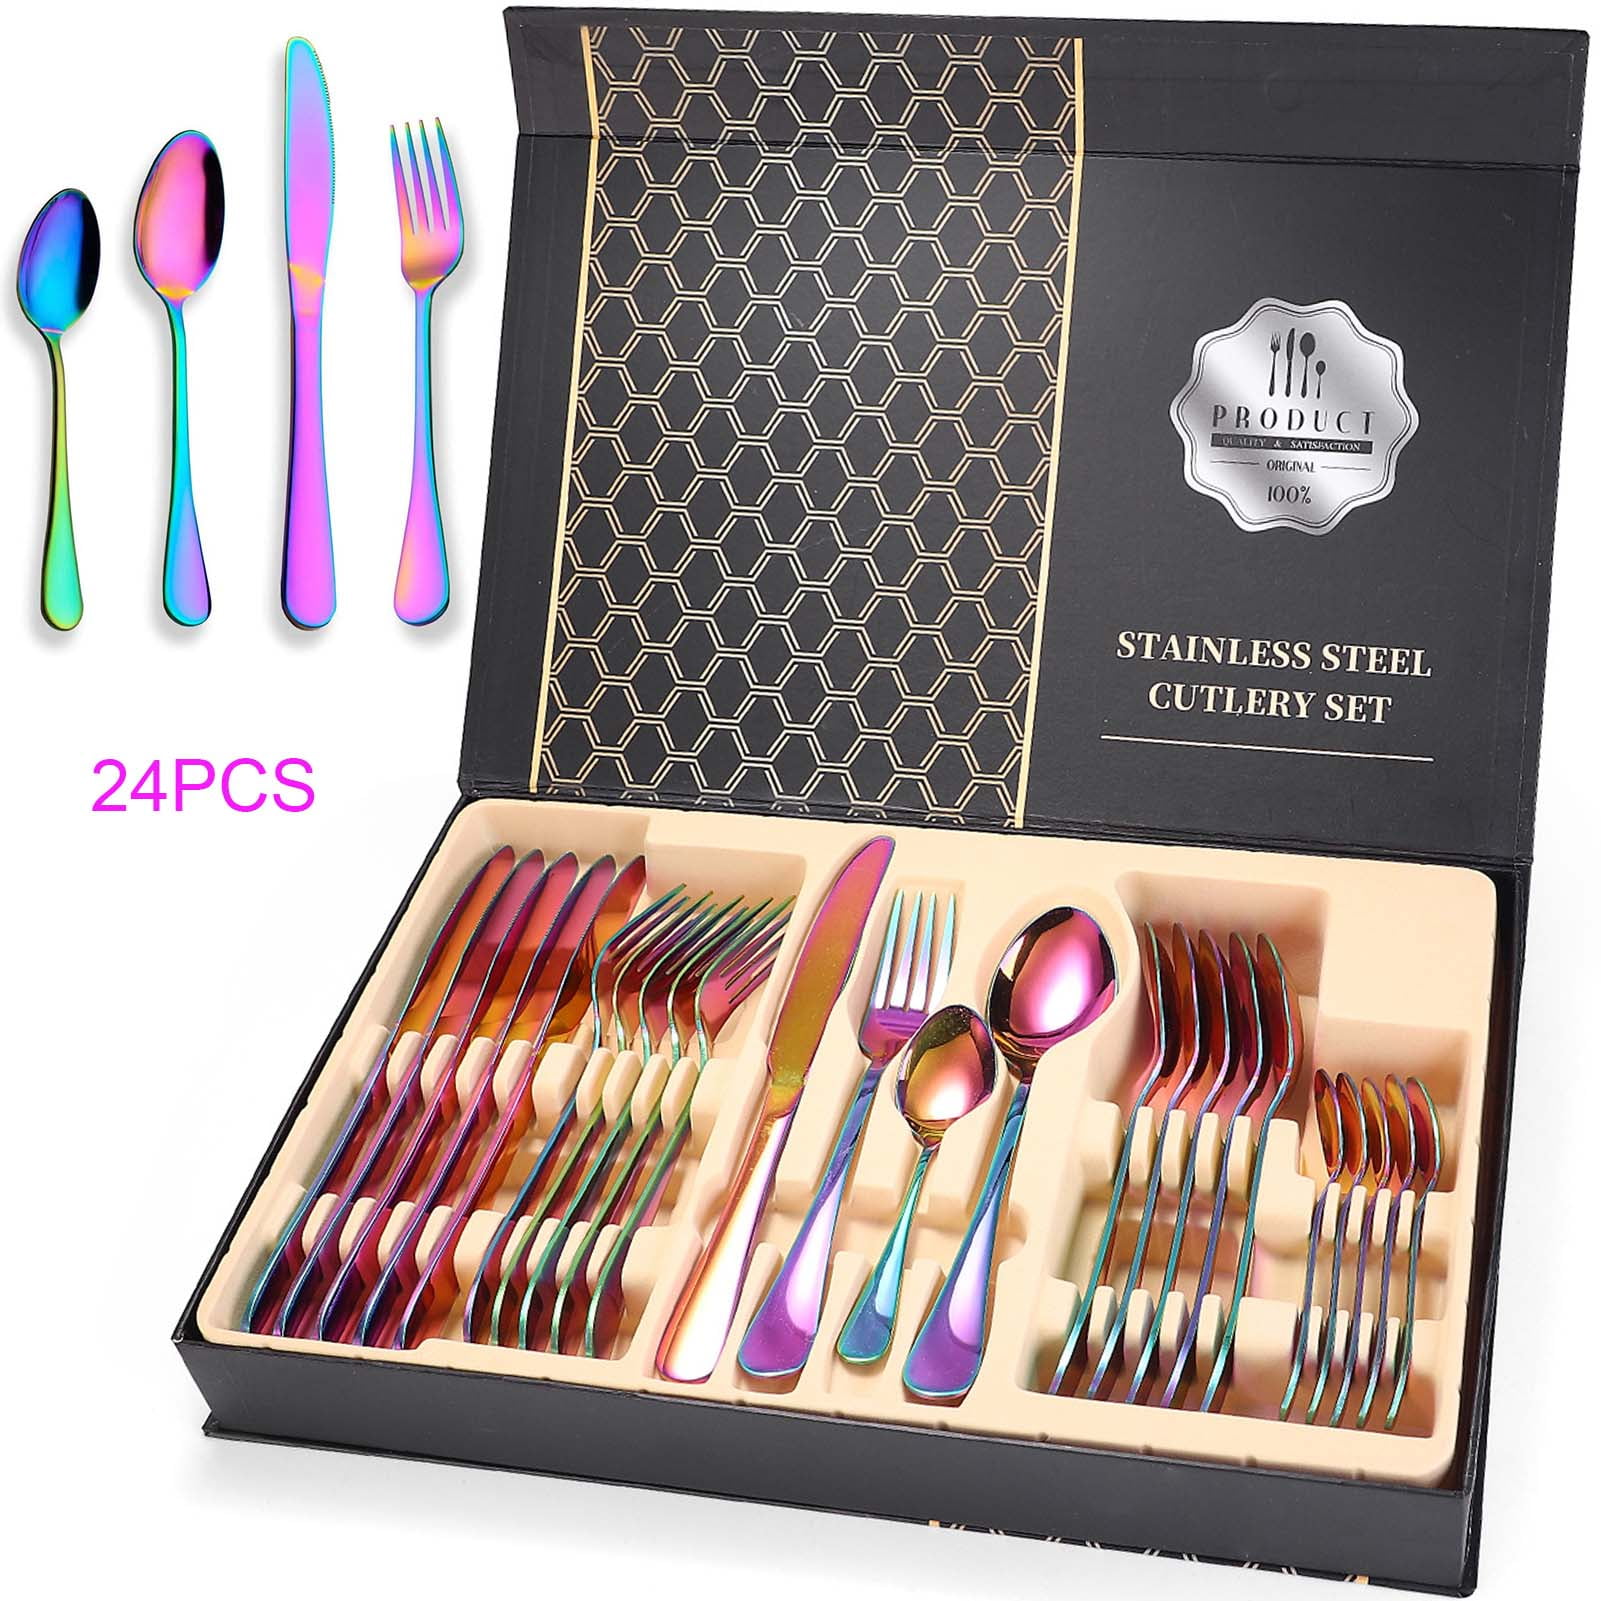 Stainless Steel With Titanium Colorful Plated JASHII Flatware Set 24 Piece Silverware Multicolor Flatware Set Rainbow Color Cutlery Set Service For 6 